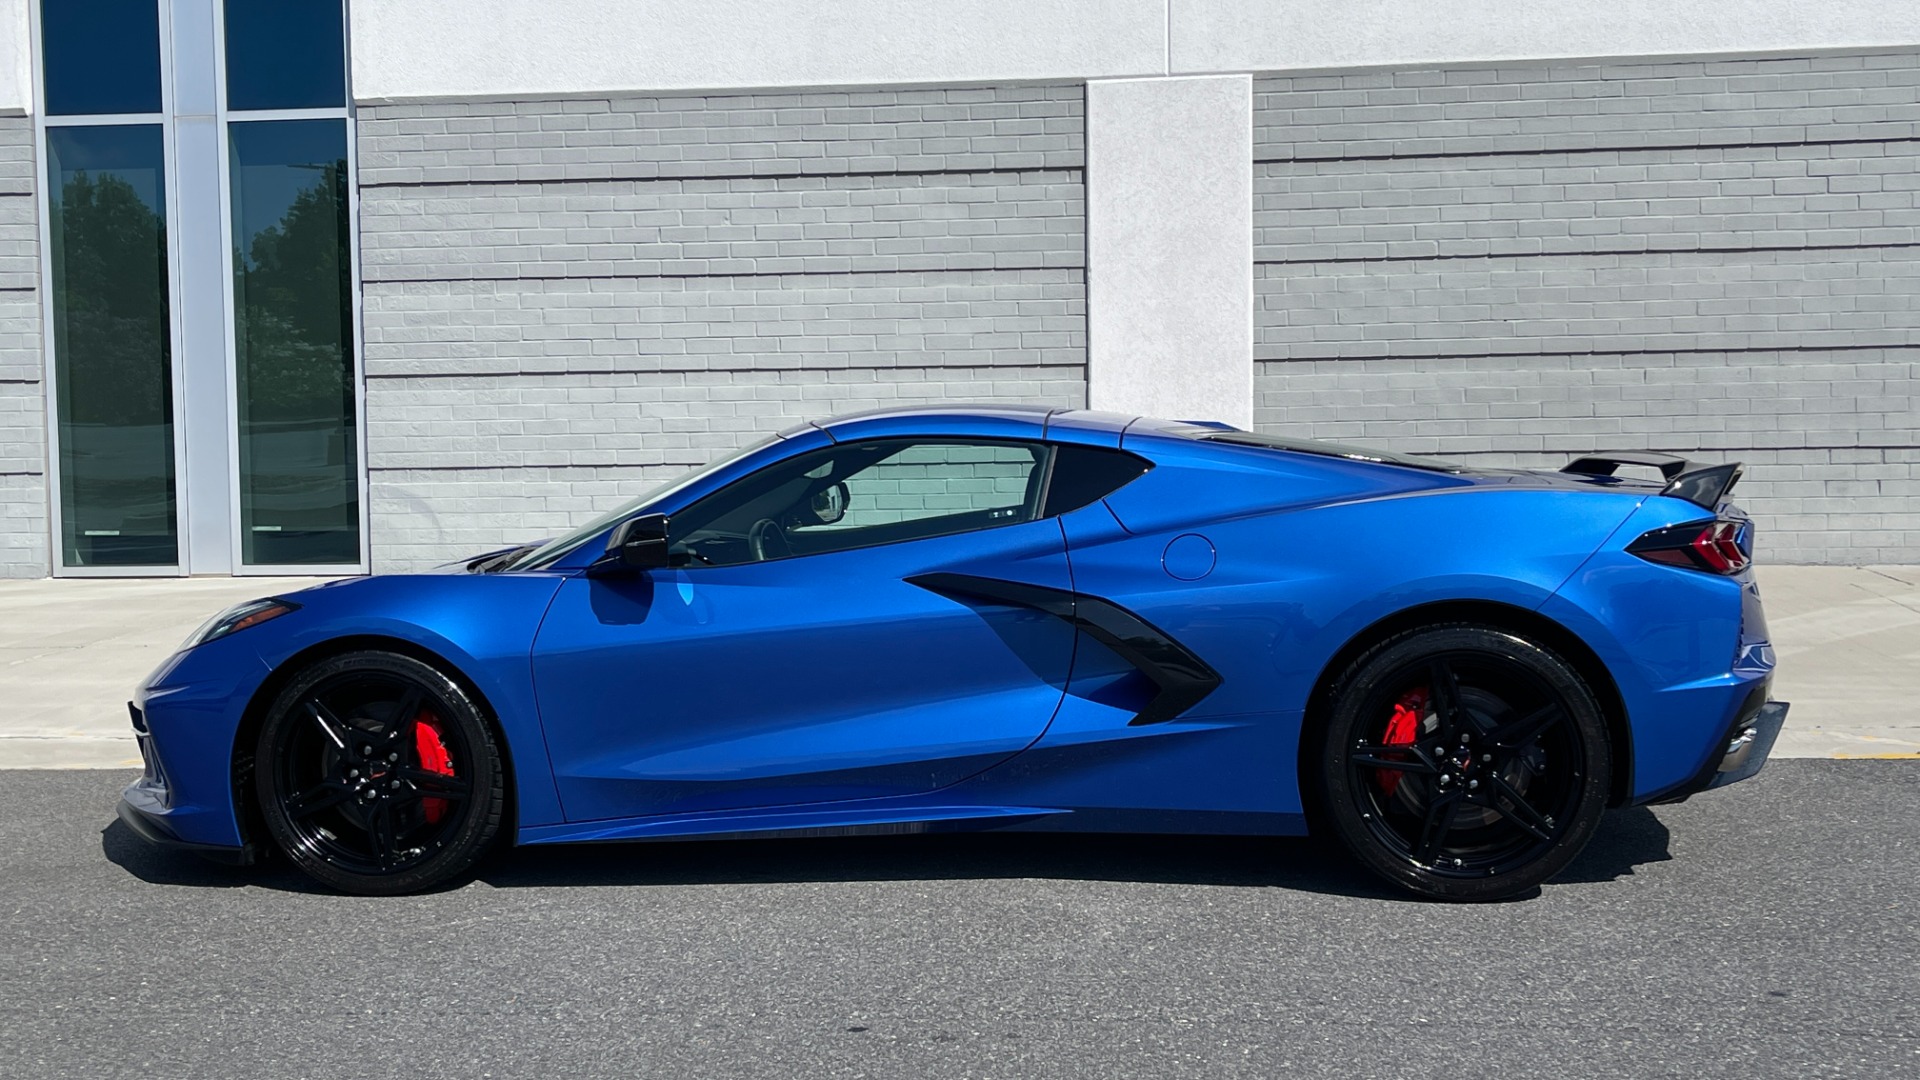 Used 2021 Chevrolet CORVETTE STINGRAY 3LT COUPE / 8-SPD / PERF PKG / NAV / BOSE / REARVIEW for sale Sold at Formula Imports in Charlotte NC 28227 5